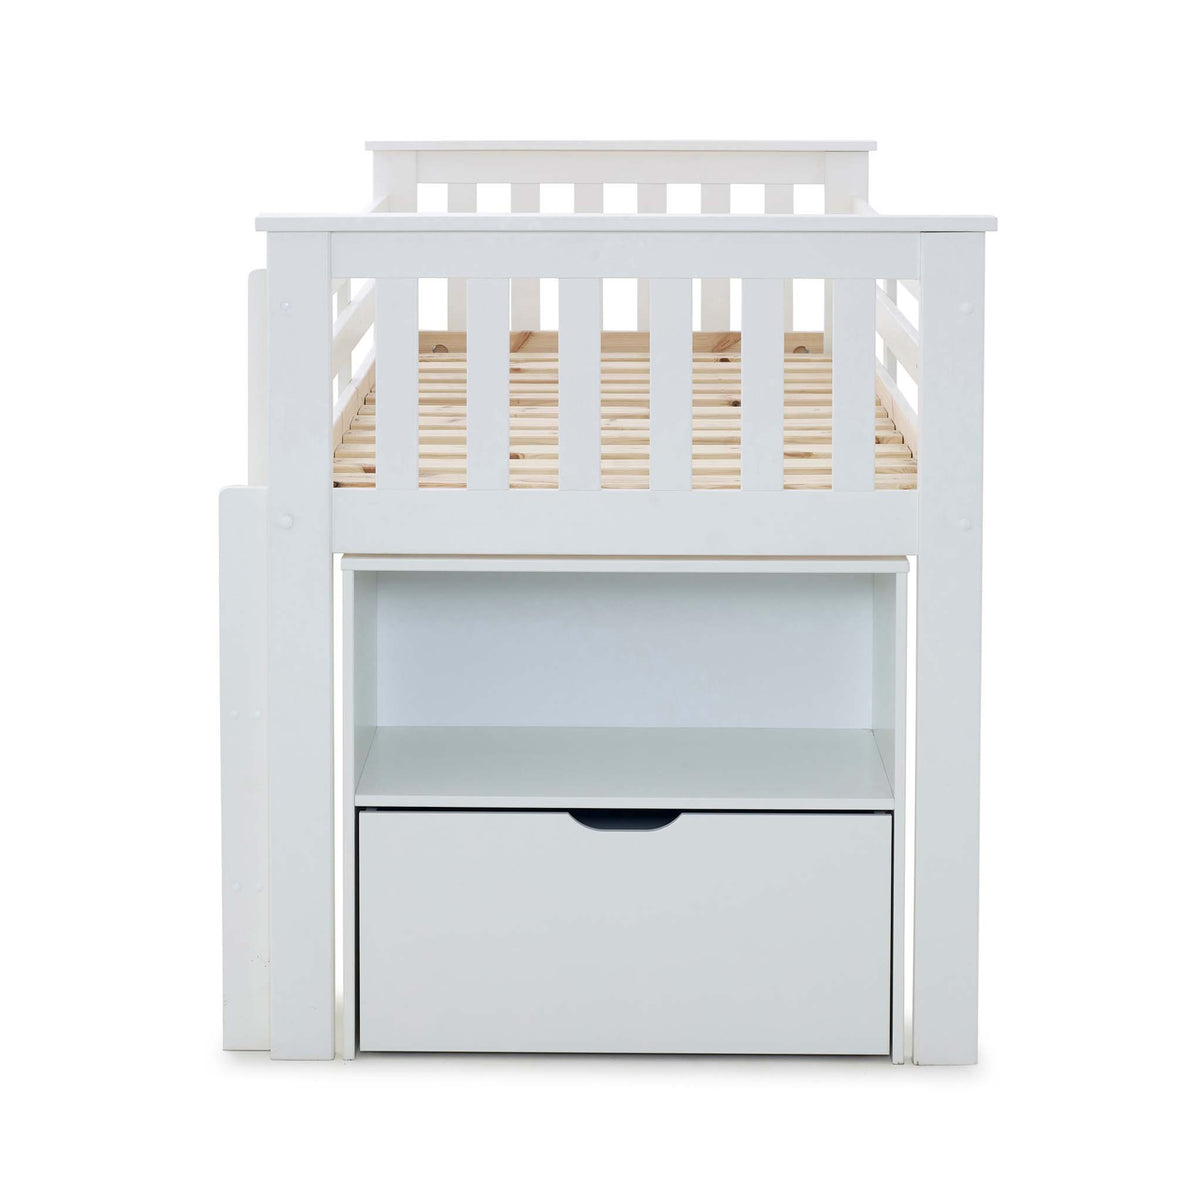 end view of the Huckerby White Childrens Sleep Station Storage Bed